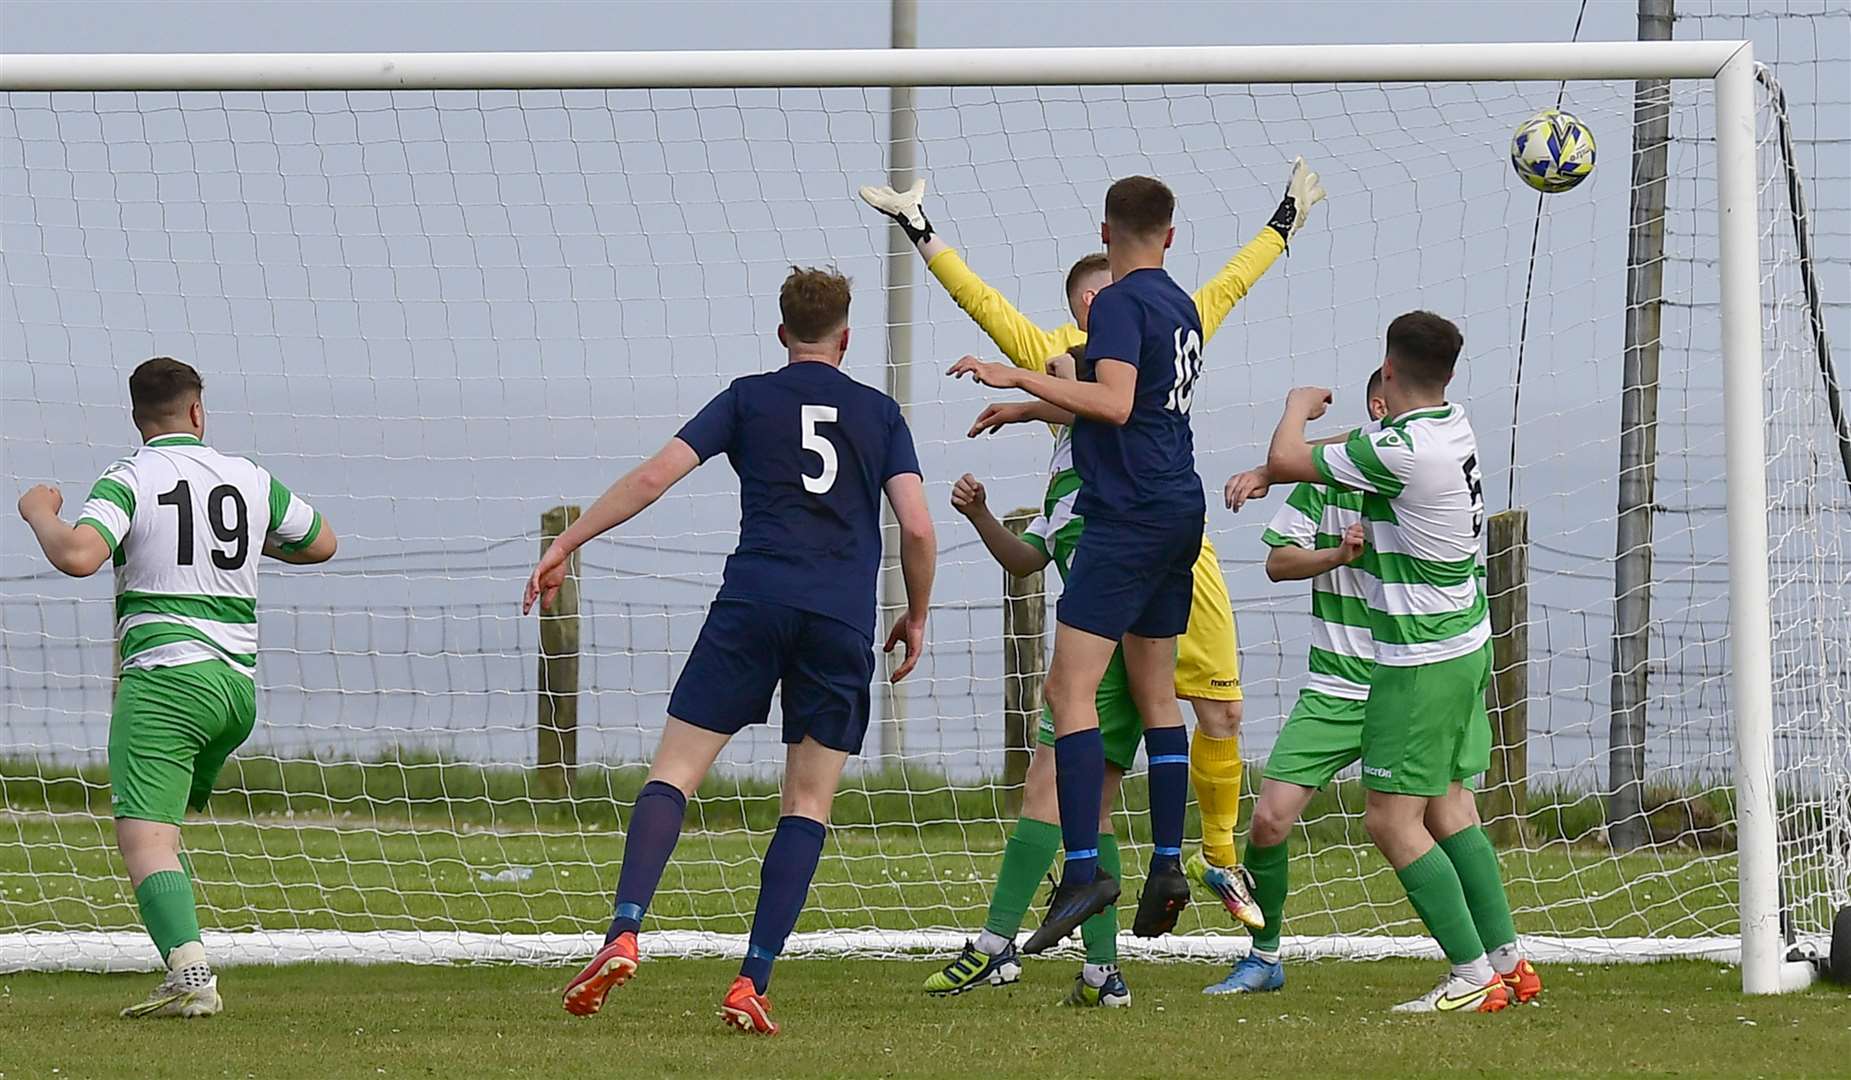 James Mackintosh's header goes into the top corner to secure victory for High Ormlie Hotspur against Helmsdale United at Couper Park. Picture: Mel Roger